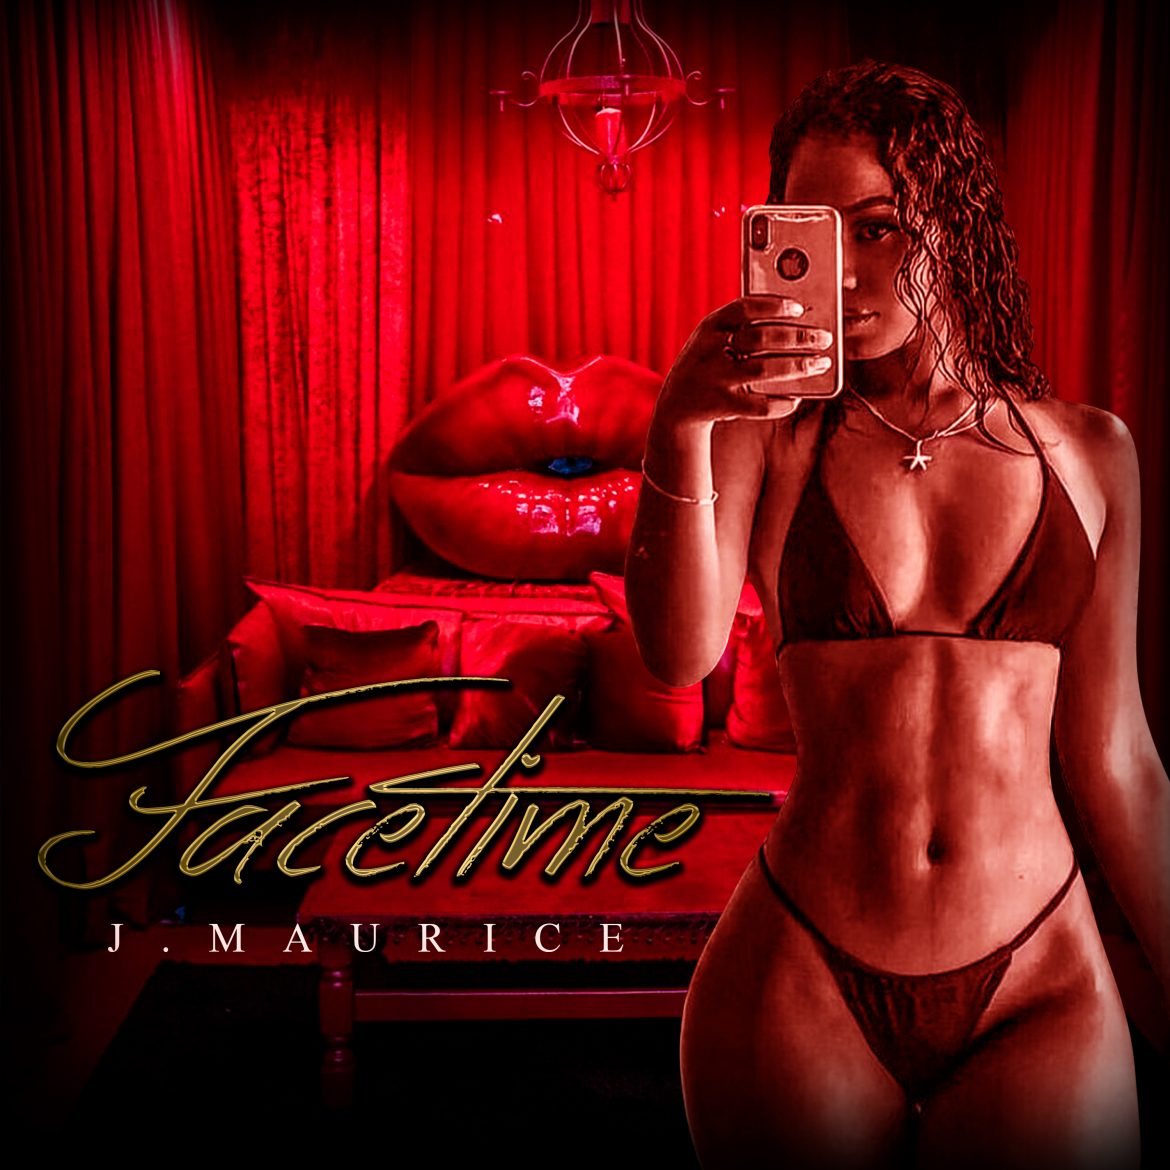 Rising high in South Africa, J. Maurice drops another hit banger with ‘Facetime’